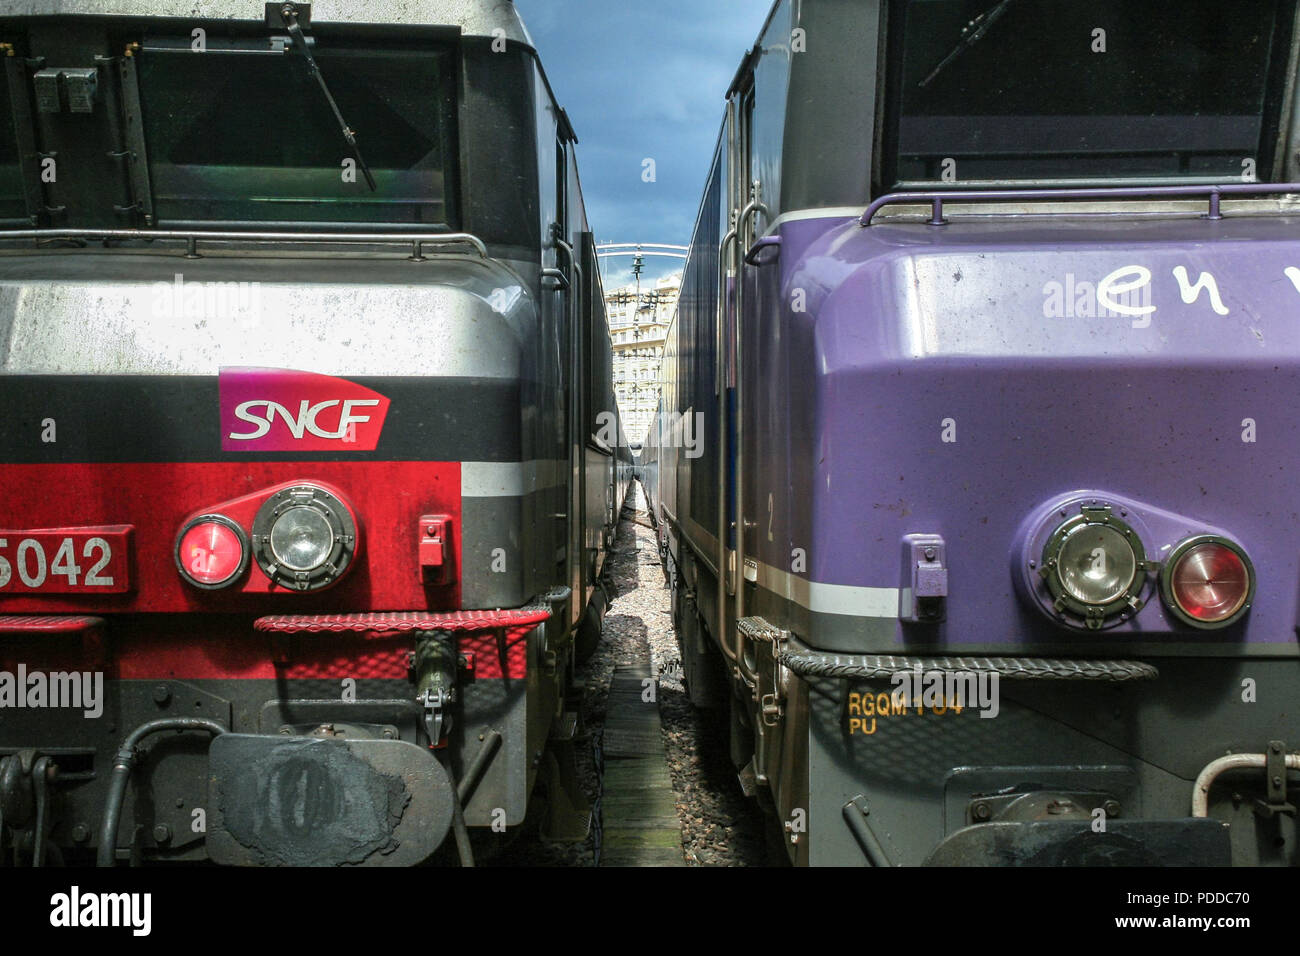 PARIS, FRANCE - AUGUST 19, 2006: Two trains ready for departure in Paris Gare de l'Est train station, with the logo of SNCF seen in front. This train  Stock Photo